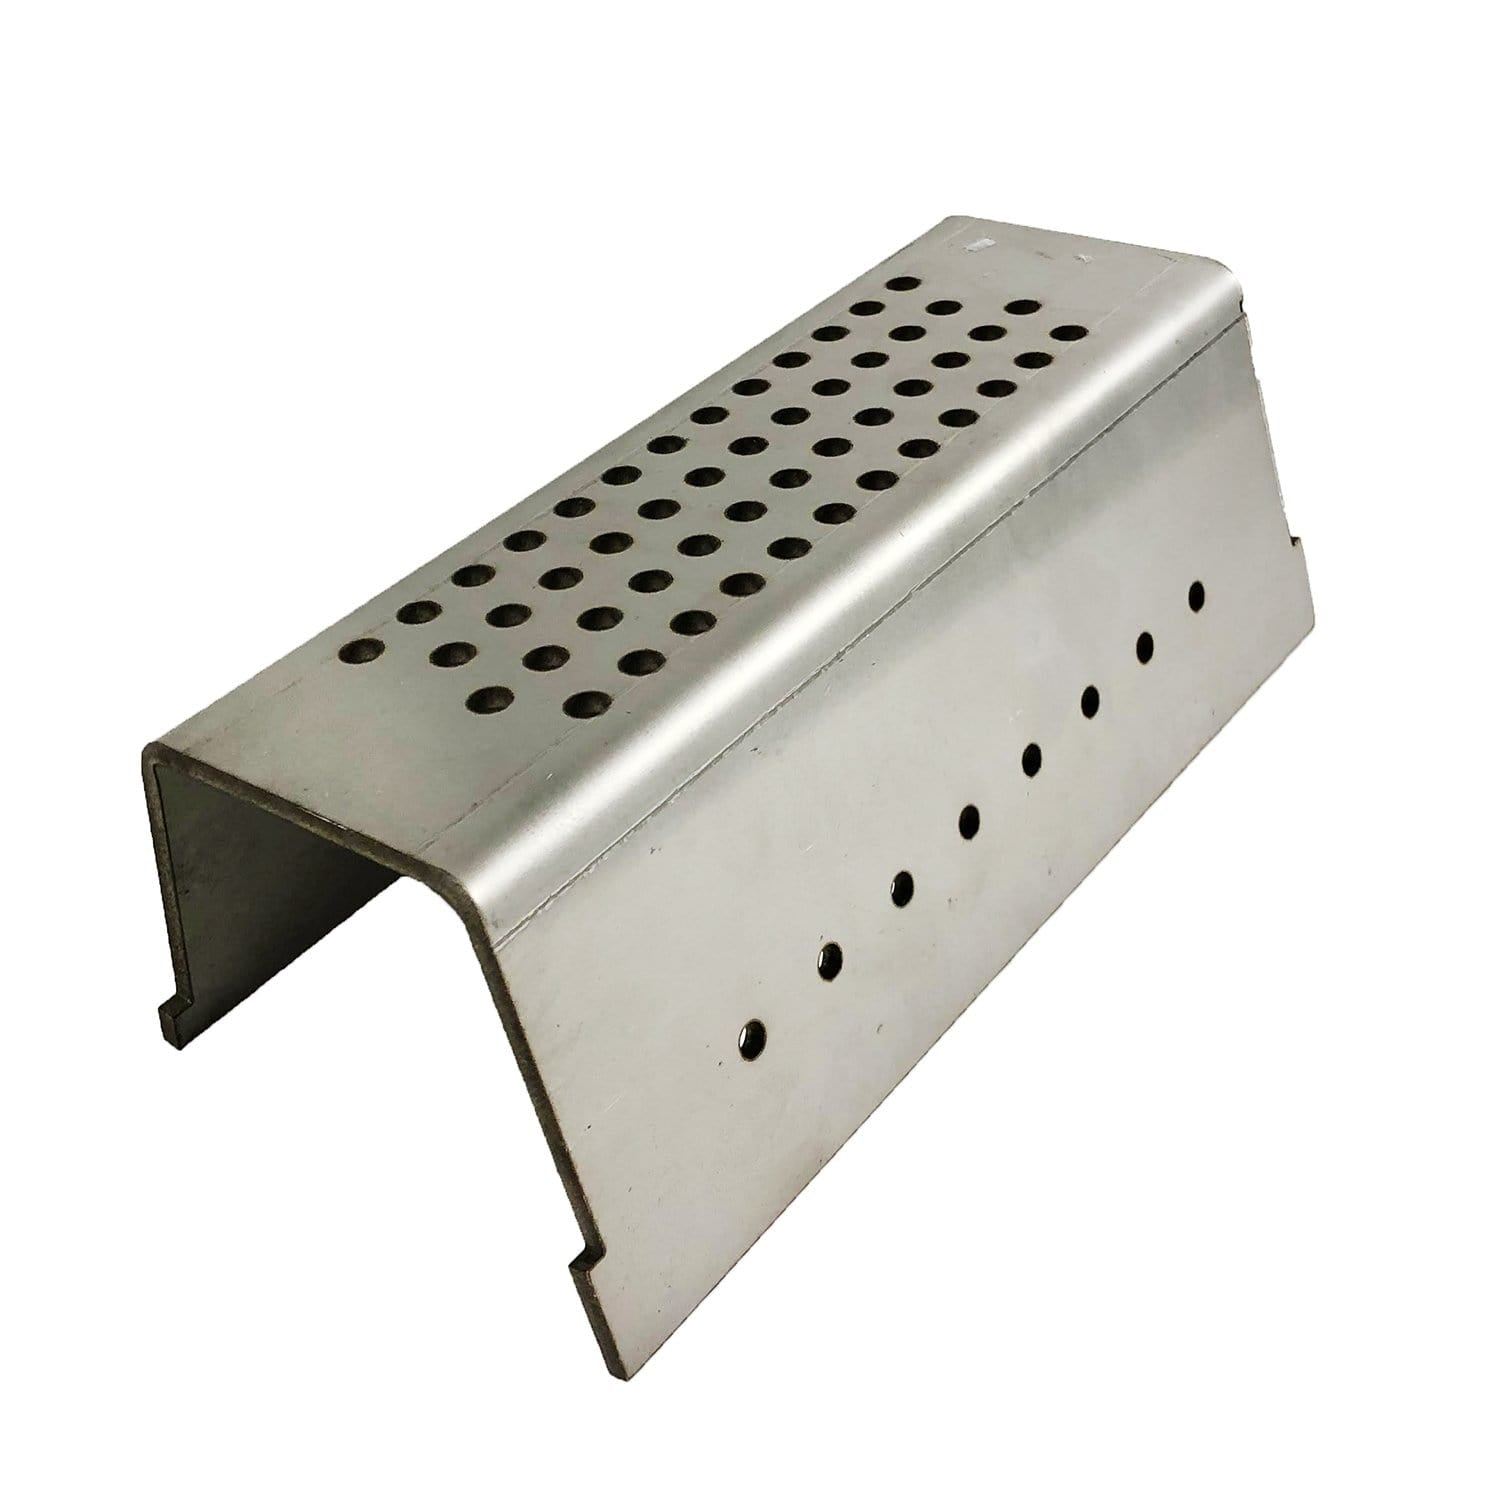 NBK 20250 Burn Grate 6-7/16" Replaces / Equivalent to WHITFIELD 12150700